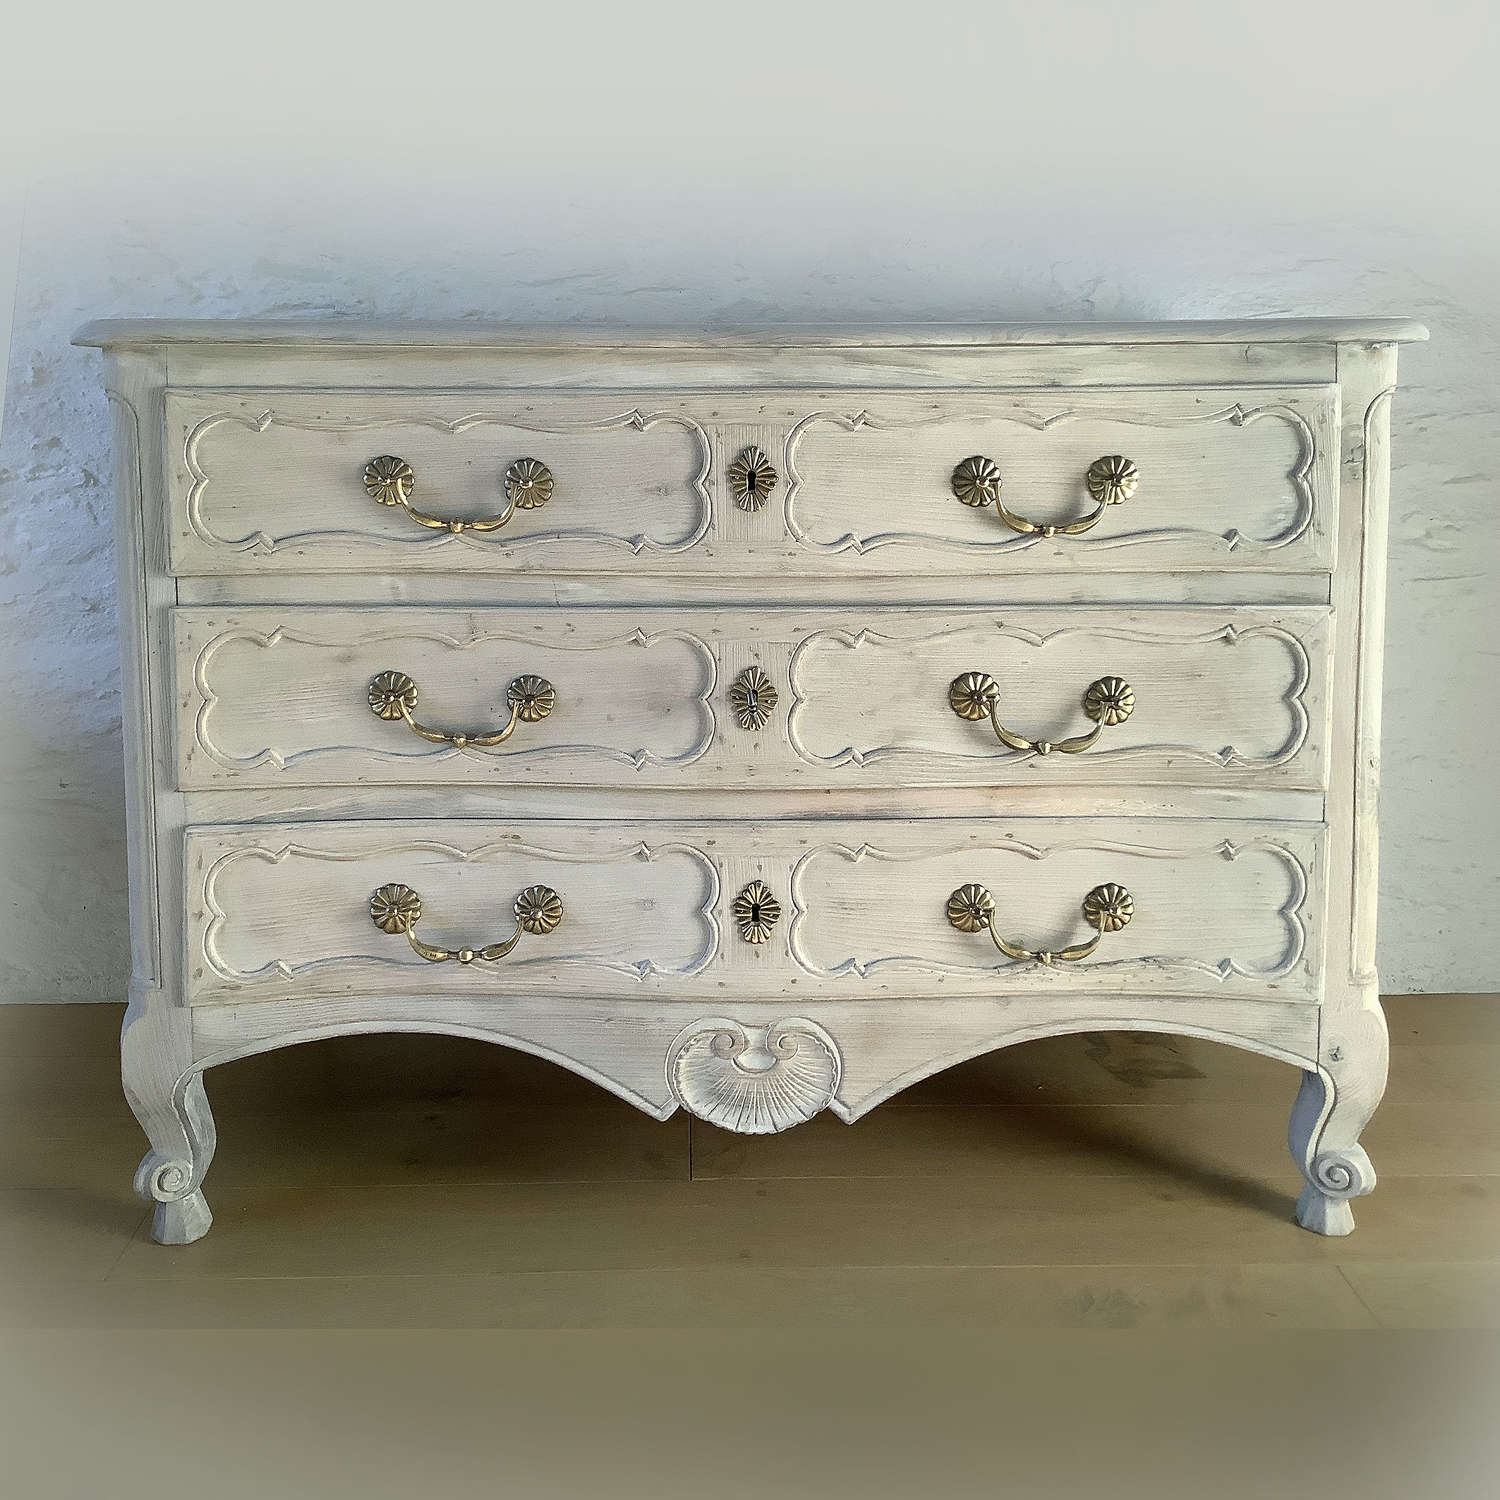 19th century Louis XV style serpentine fronted commode